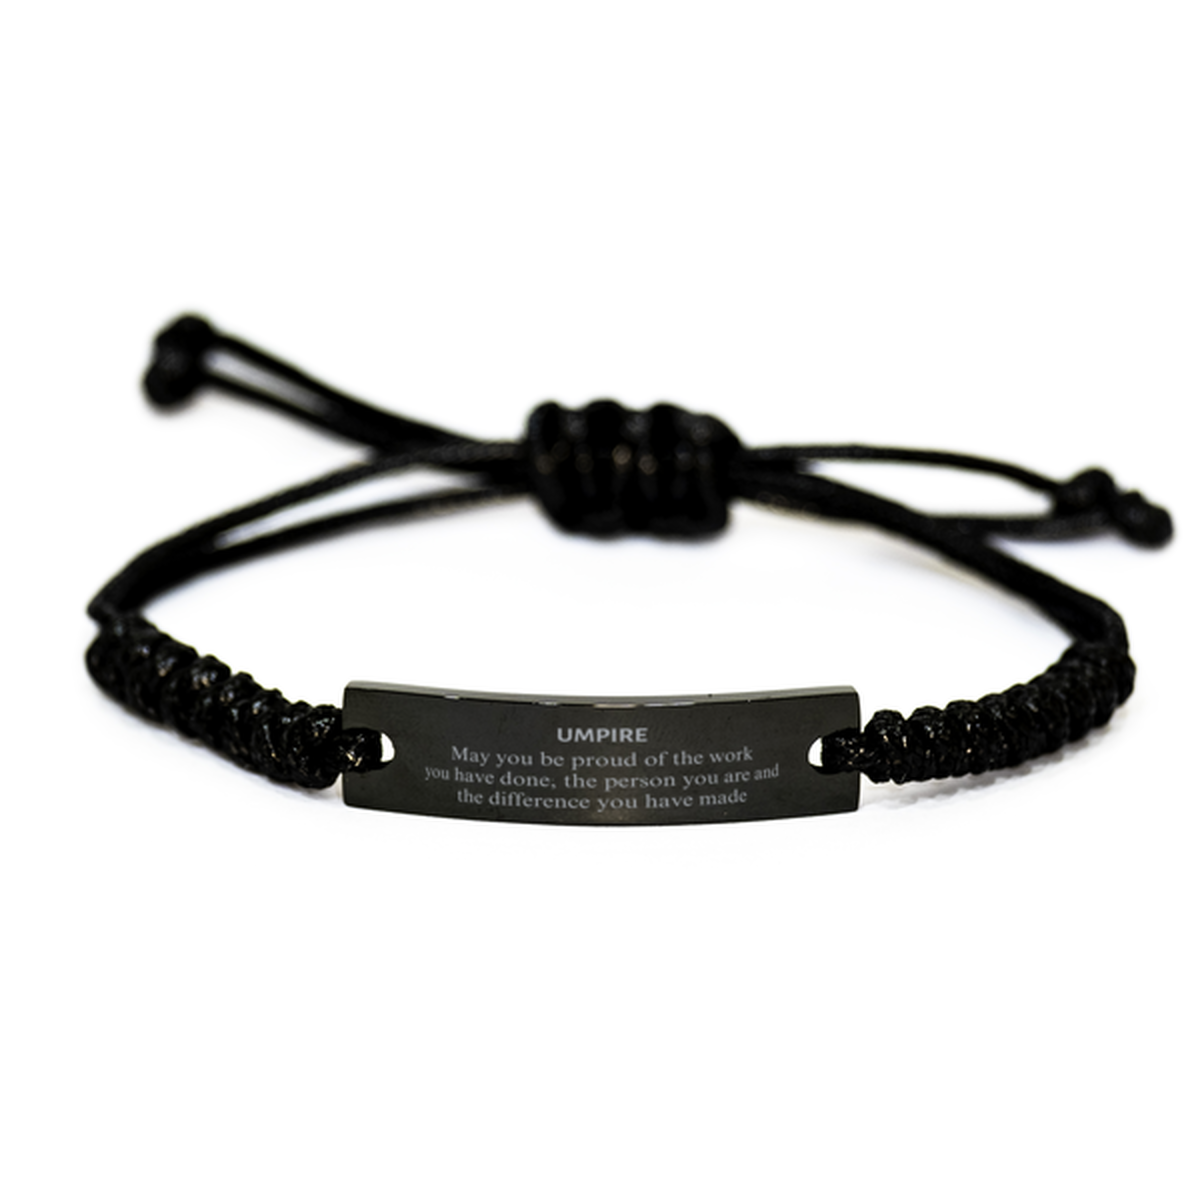 Umpire May you be proud of the work you have done, Retirement Umpire Black Rope Bracelet for Colleague Appreciation Gifts Amazing for Umpire